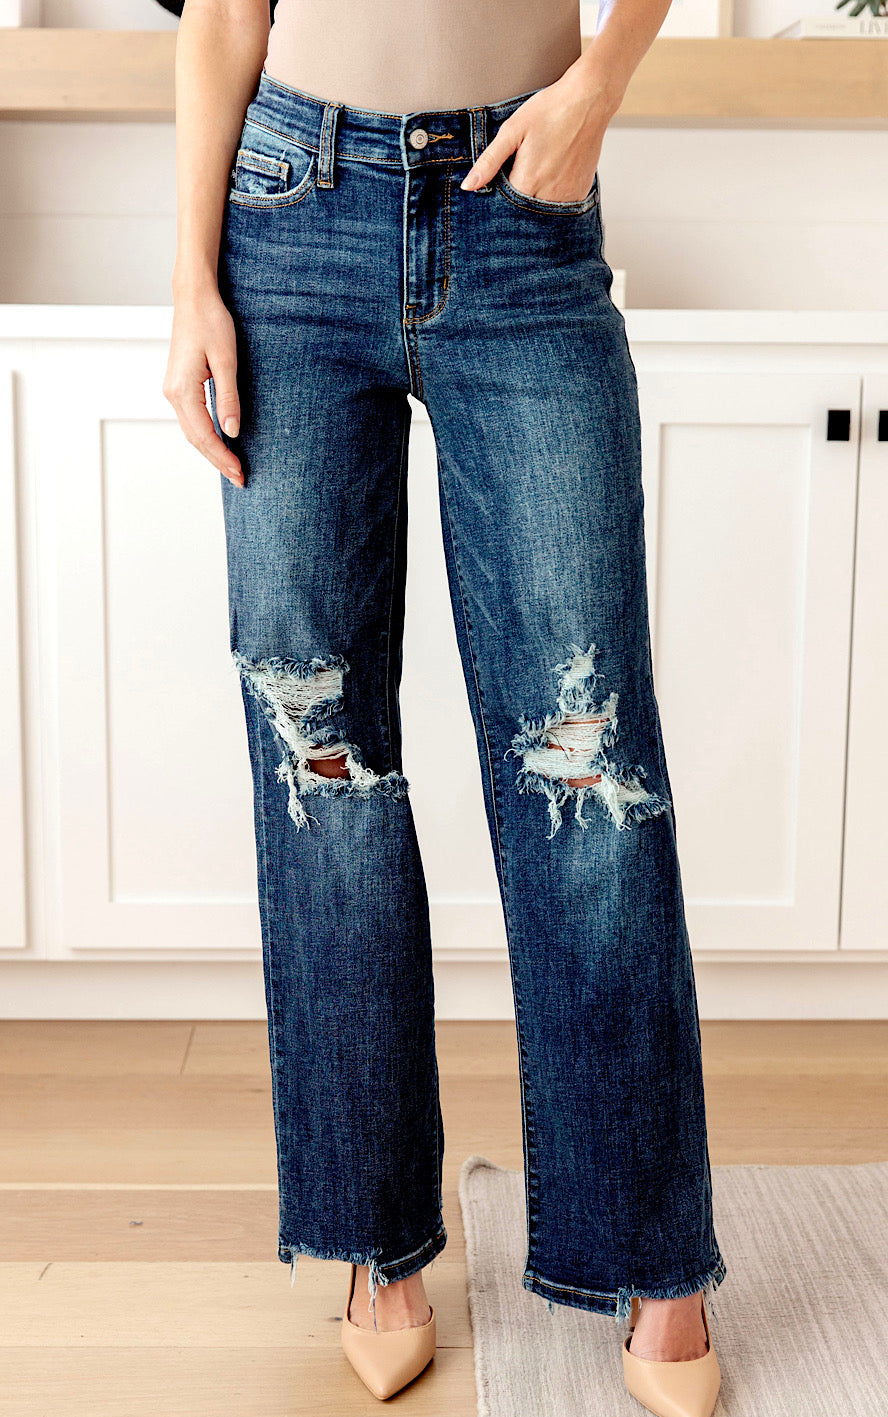 RESTOCKED! Casual Perfection Dark Wash Straight Leg Jeans by Judy Blue 0-24W